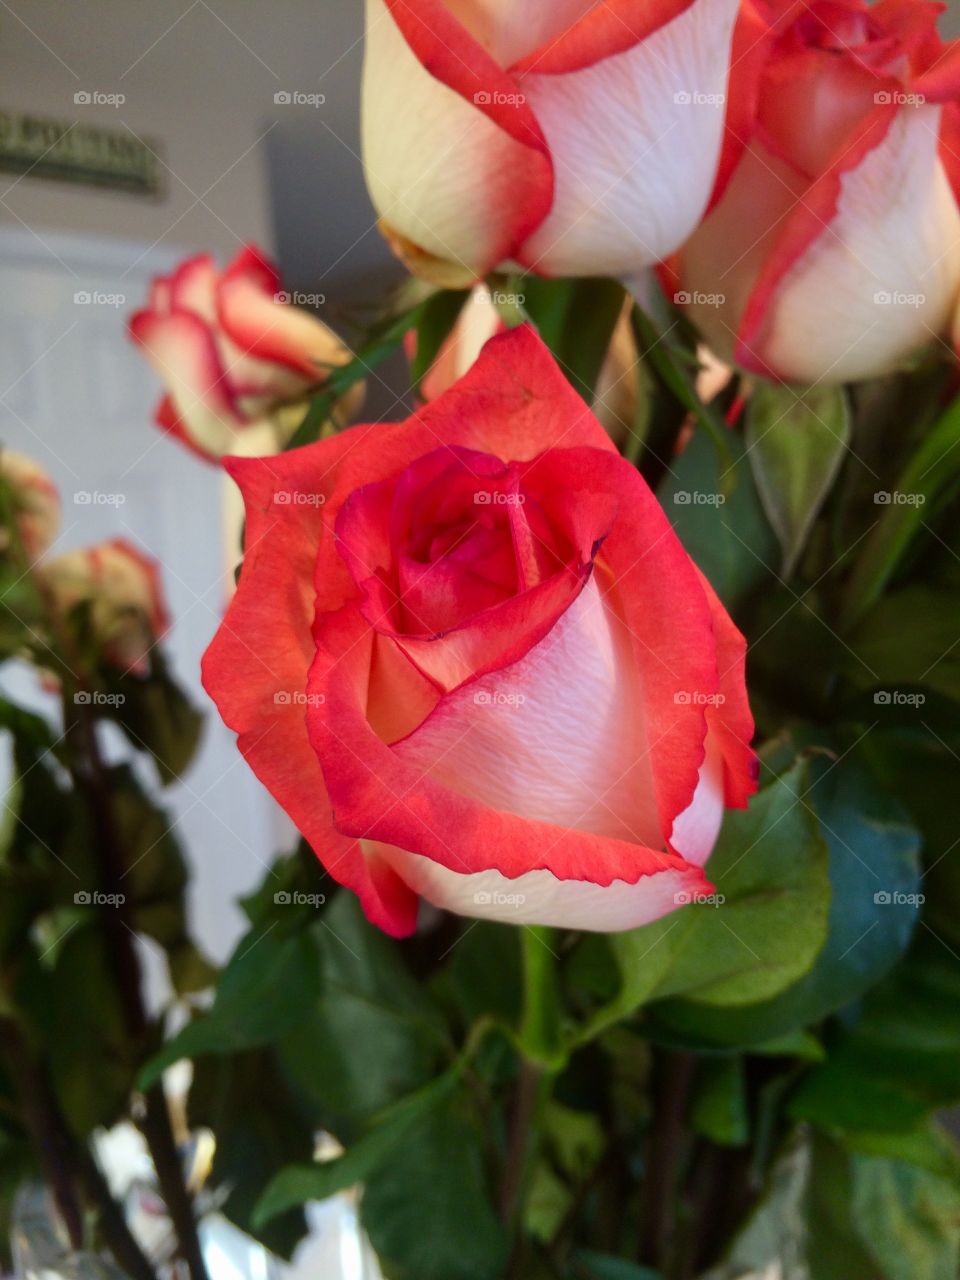 Cute professional looking picture of a rose